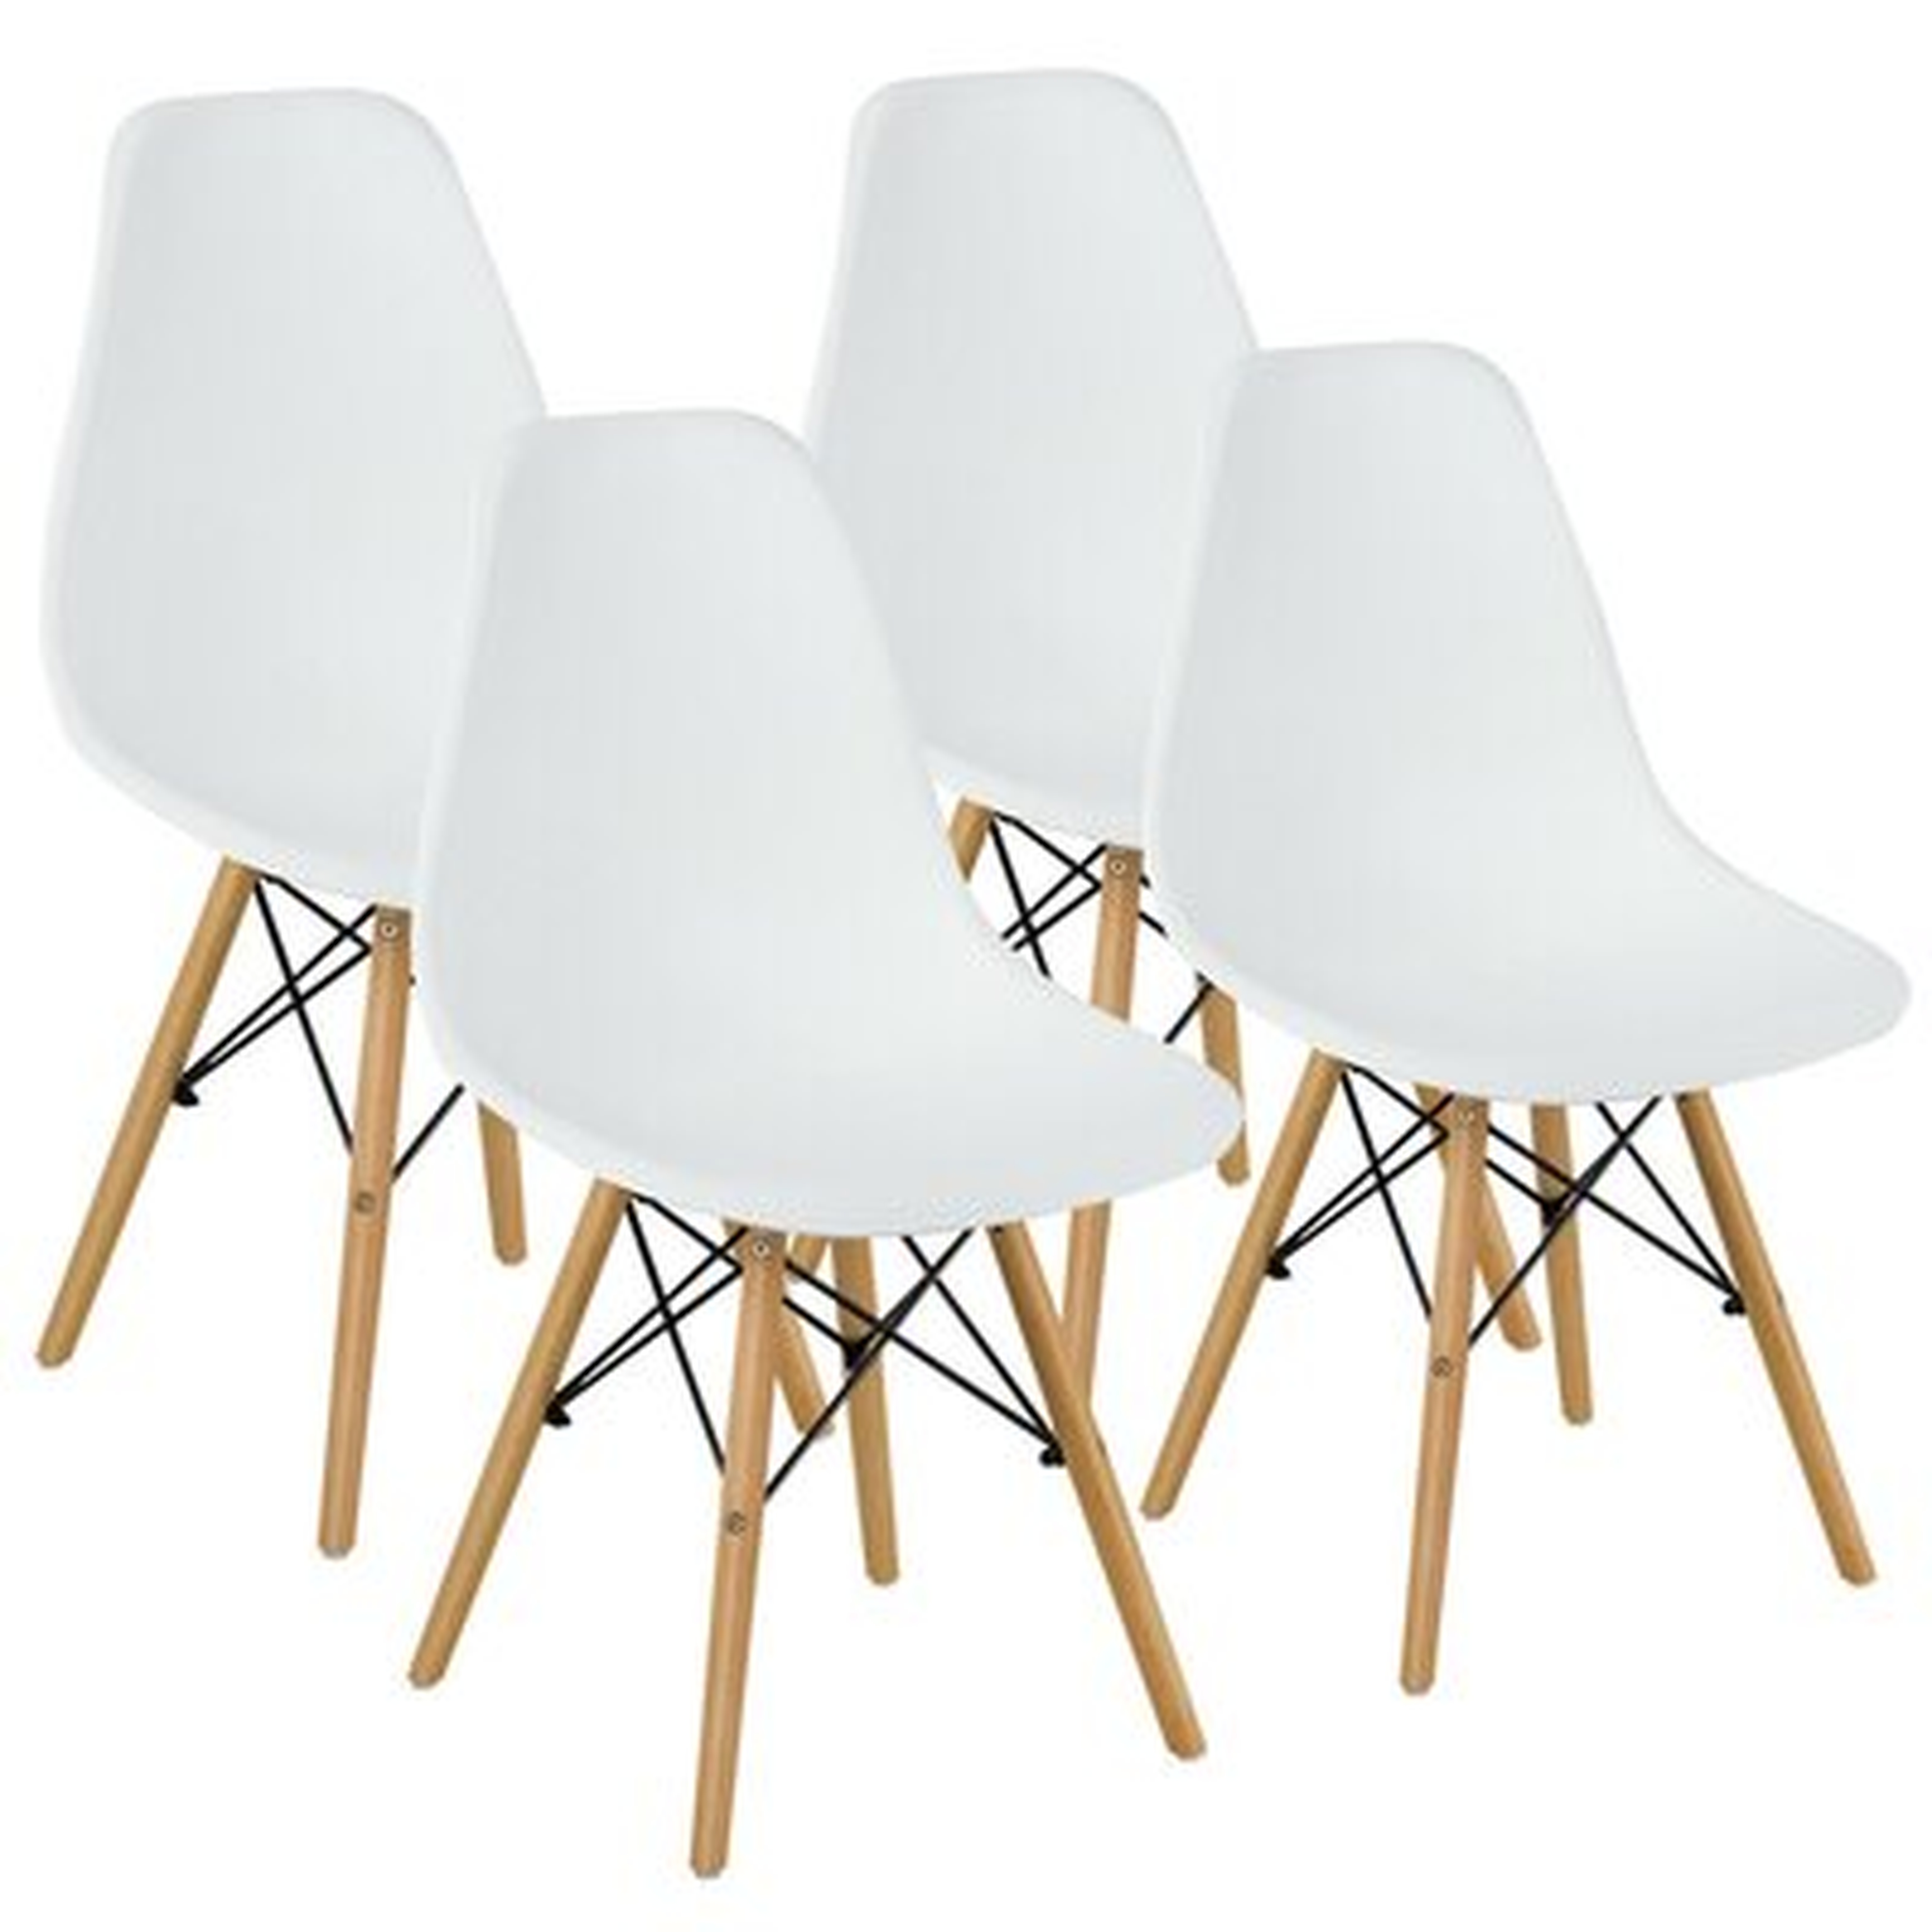 George Oliver Set Of 4 Modern Dining Side Chairs Armless Home Office W/ Wood Legs White - Wayfair